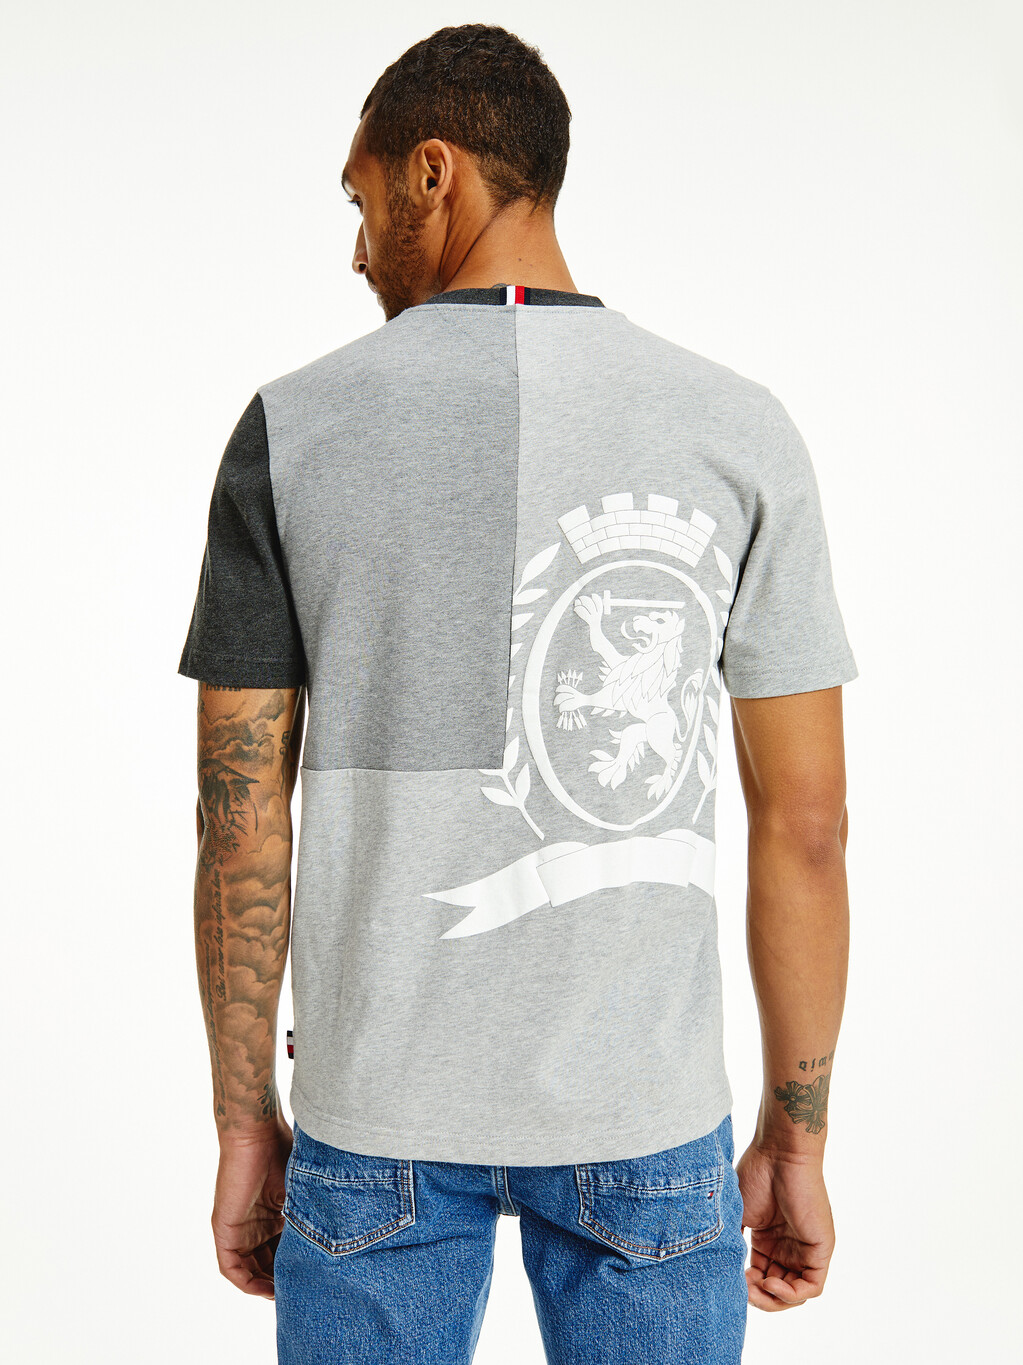 Icons Crest Relaxed Fit T-Shirt